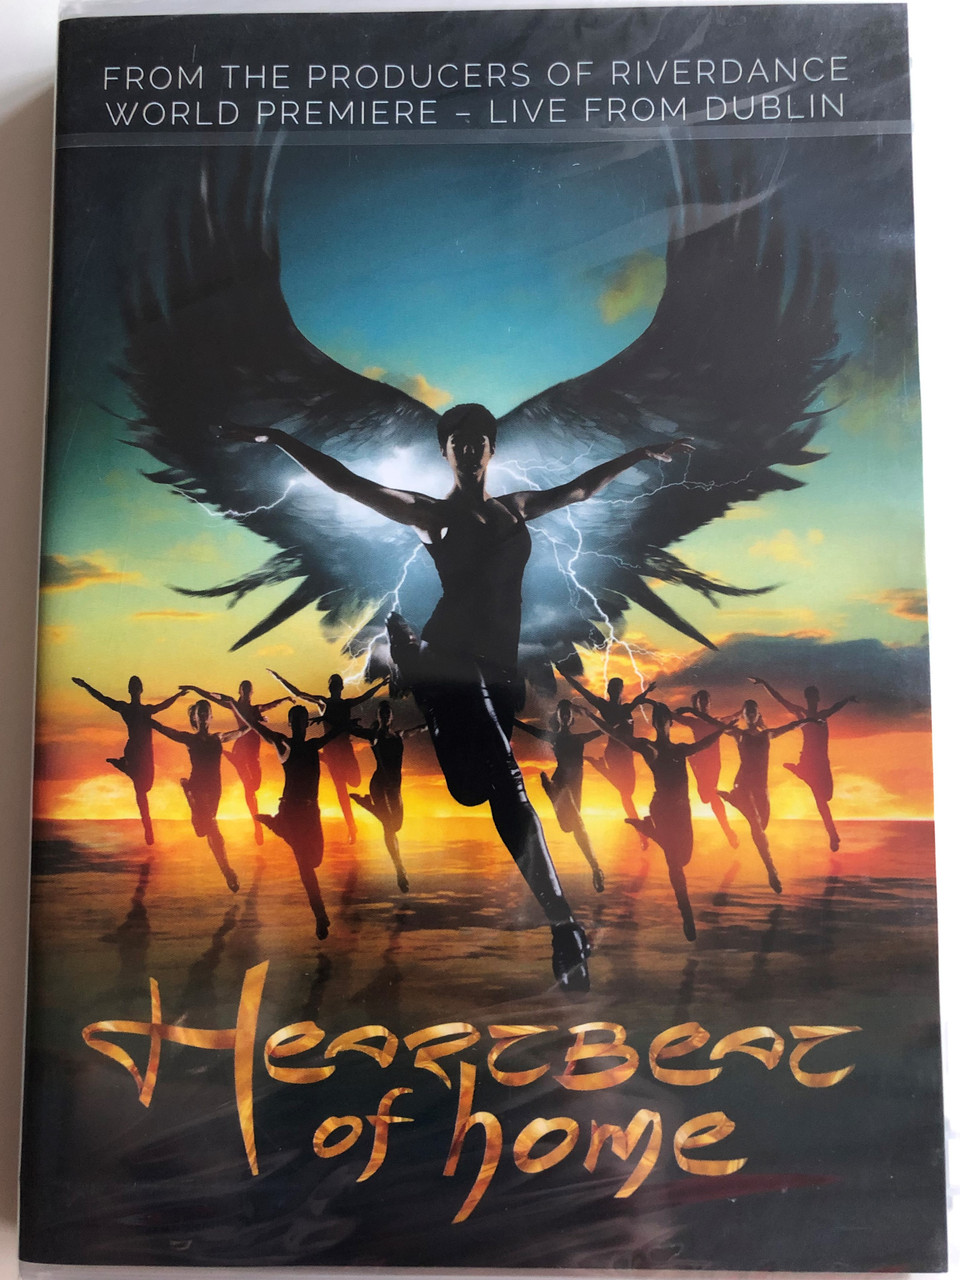 Heartbeat of home DVD 2013 From the producers of riverdance world premiere  - Live from Dublin / Directed by John McColgan / Composed by Brian Byrne /  Choreographers David Bolger, John Carey / Decca - Universal -  bibleinmylanguage